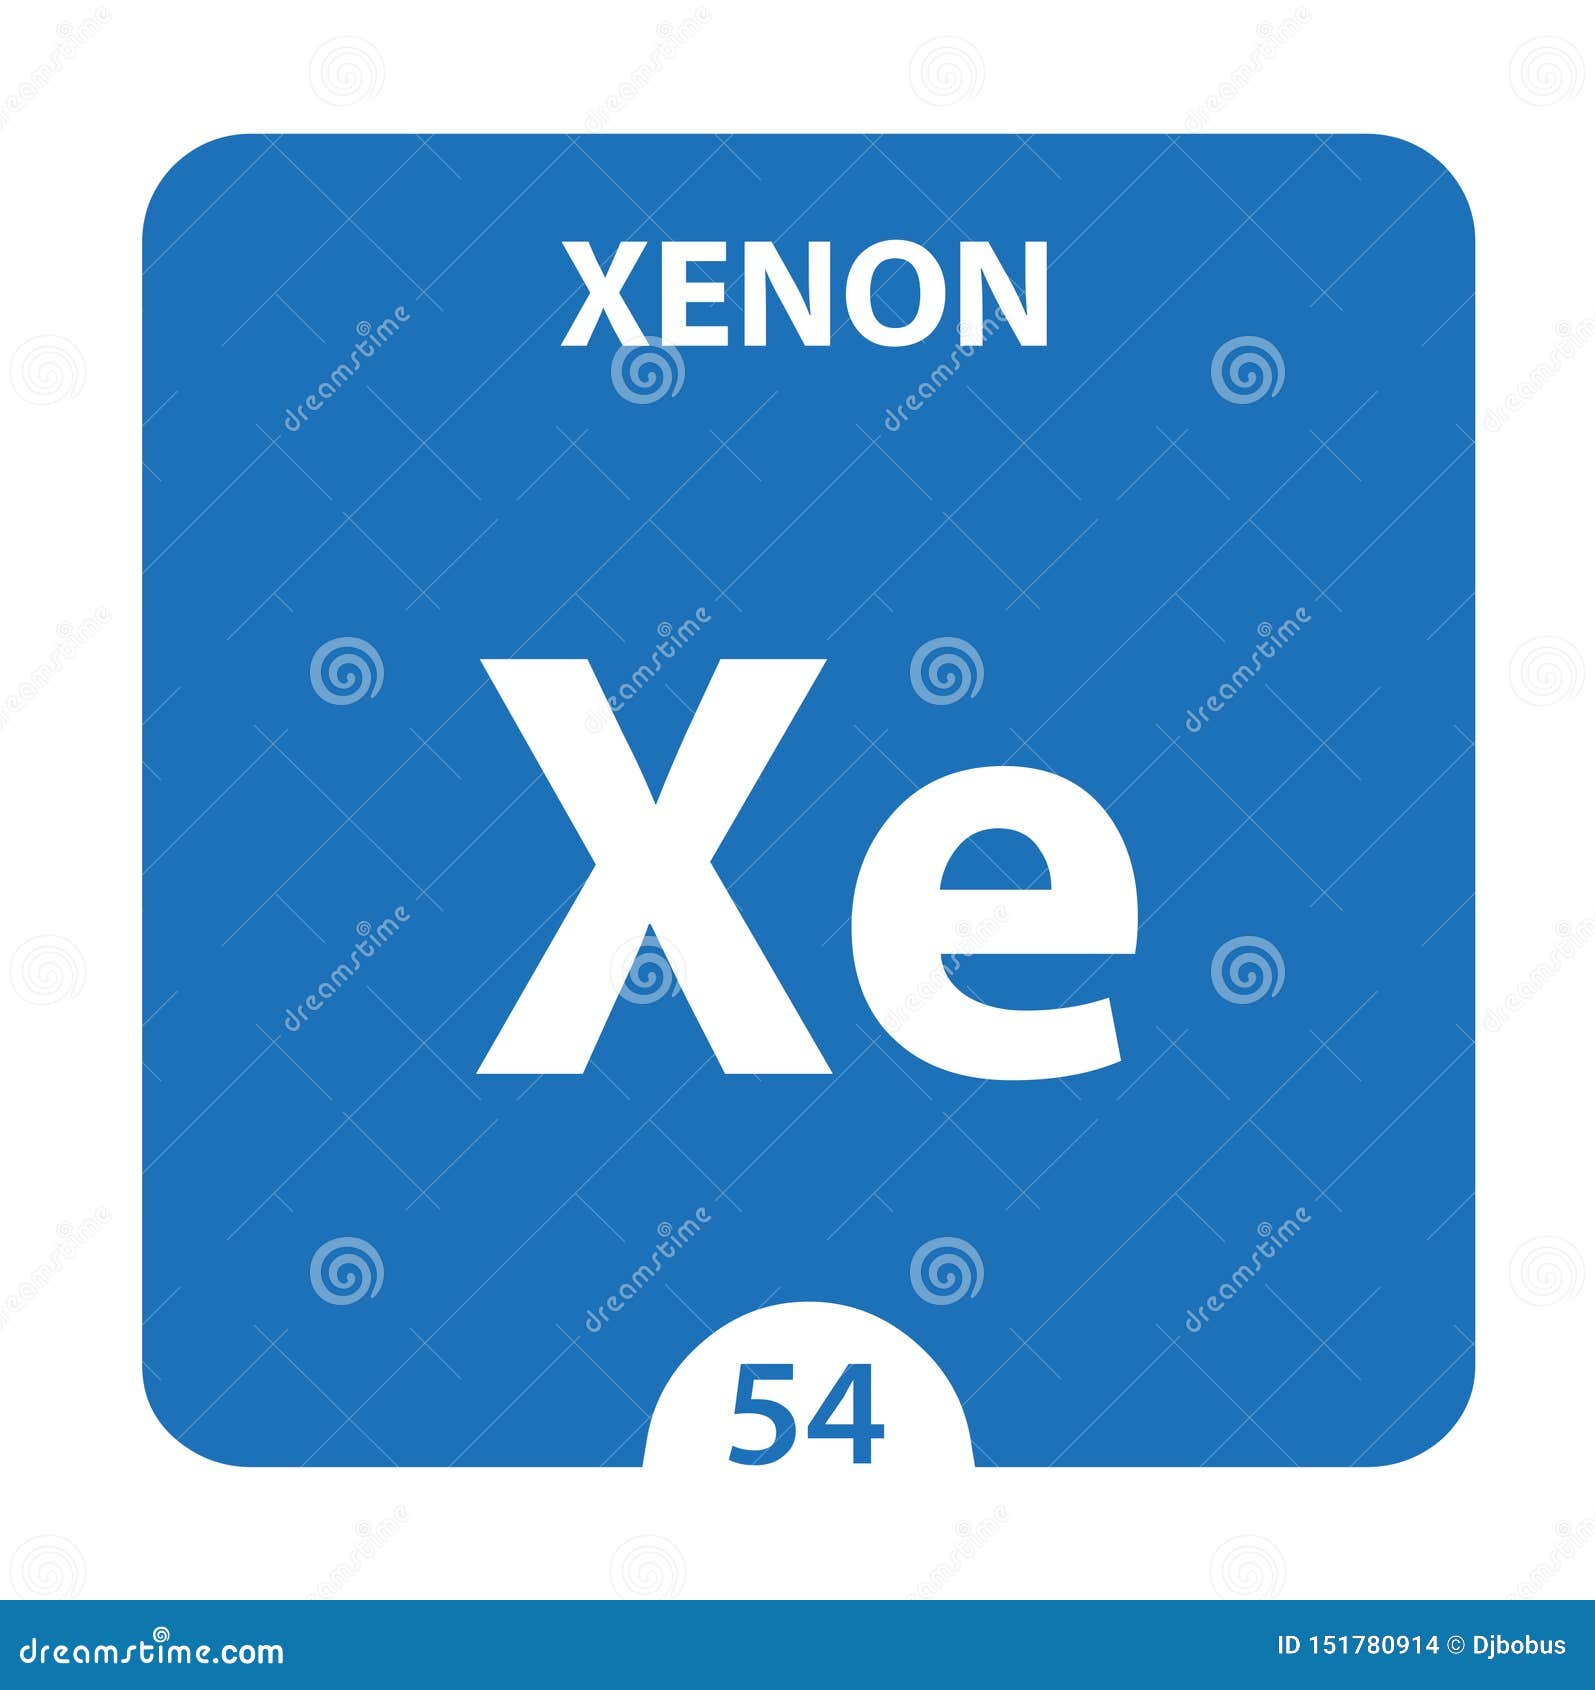 Xenon symbol. Element number 54 of the Periodic Table of the